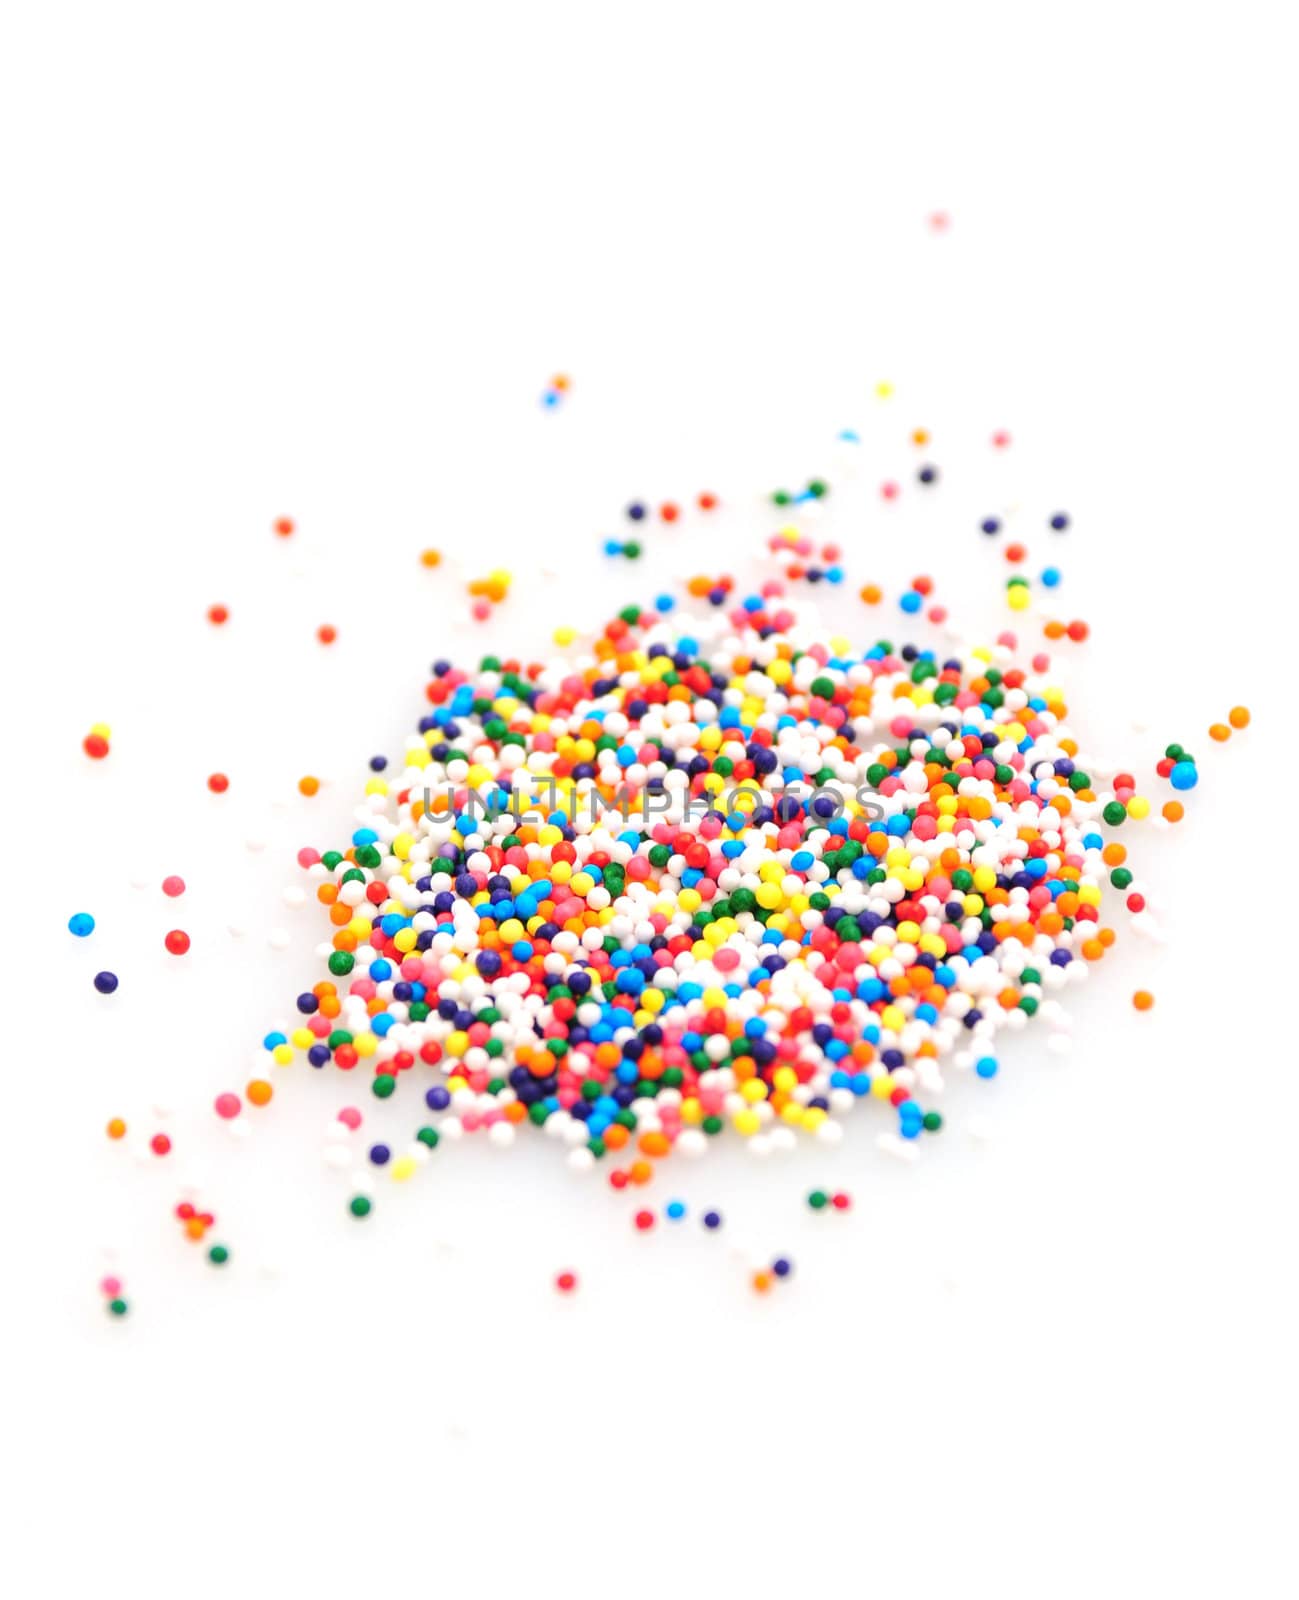 Colorful sprinkles on white background by ftlaudgirl